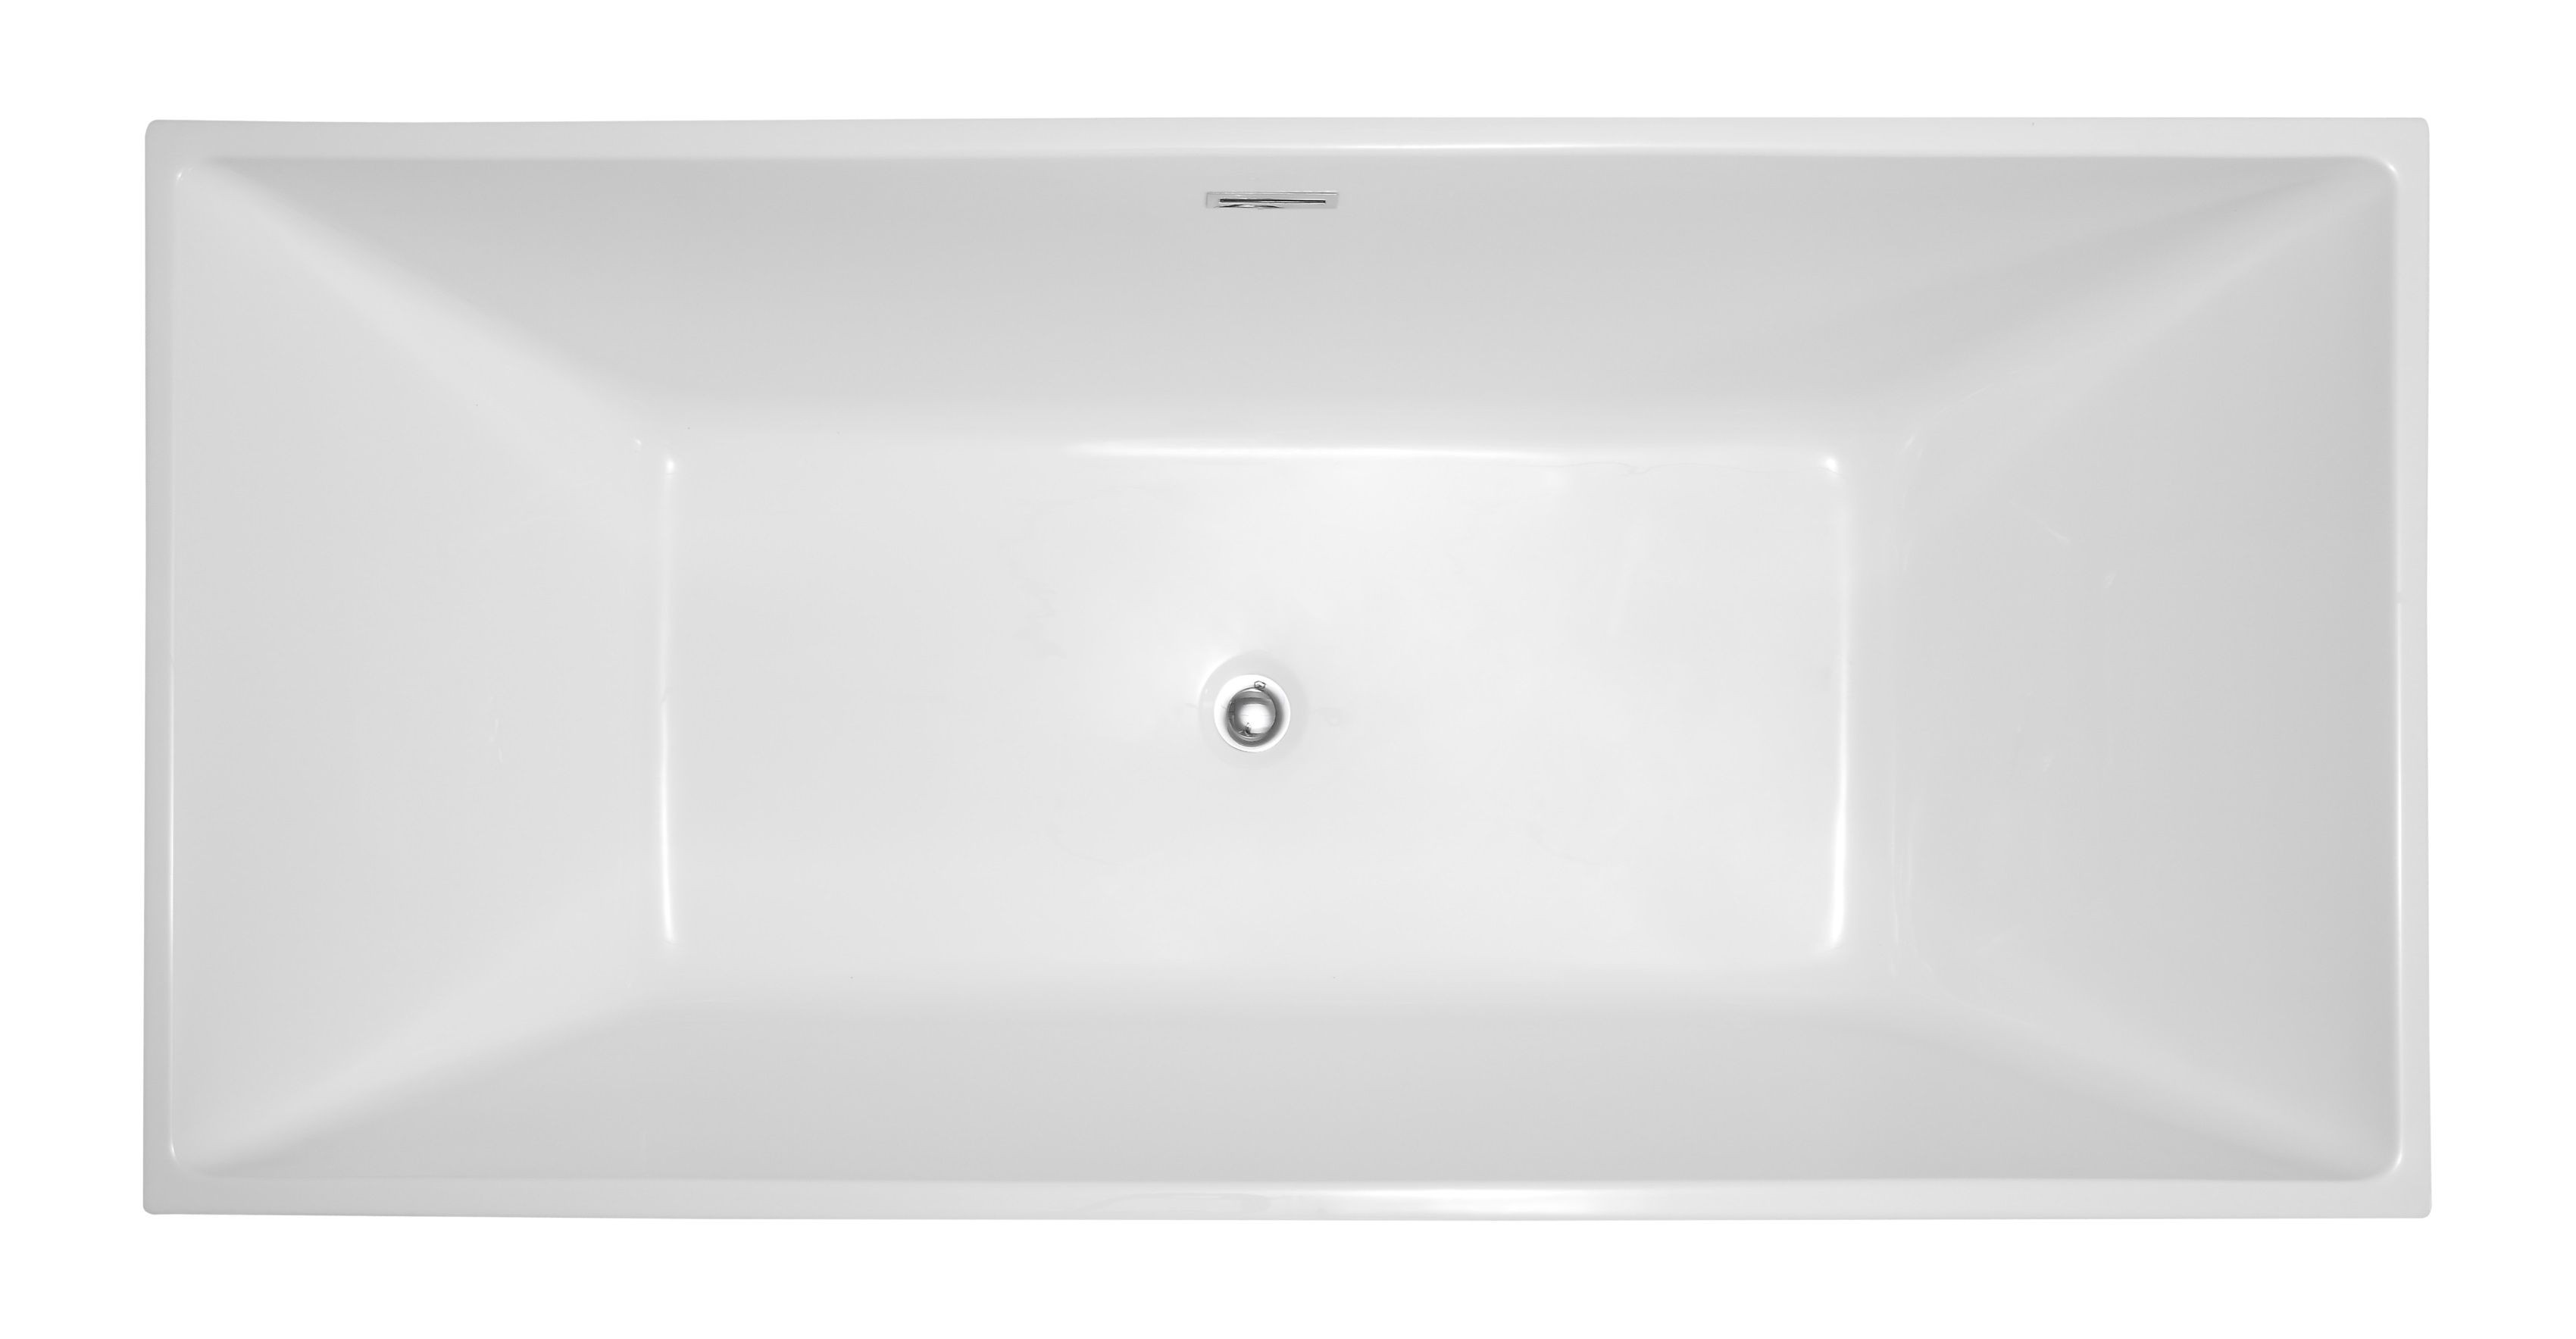 VANITY ART VA6813B-L 66 7/8 INCH FREESTANDING ACRYLIC SOAKING BATHTUB WITH POLISHED CHROME SLOTTED OVERFLOW AND POP-UP DRAIN - WHITE